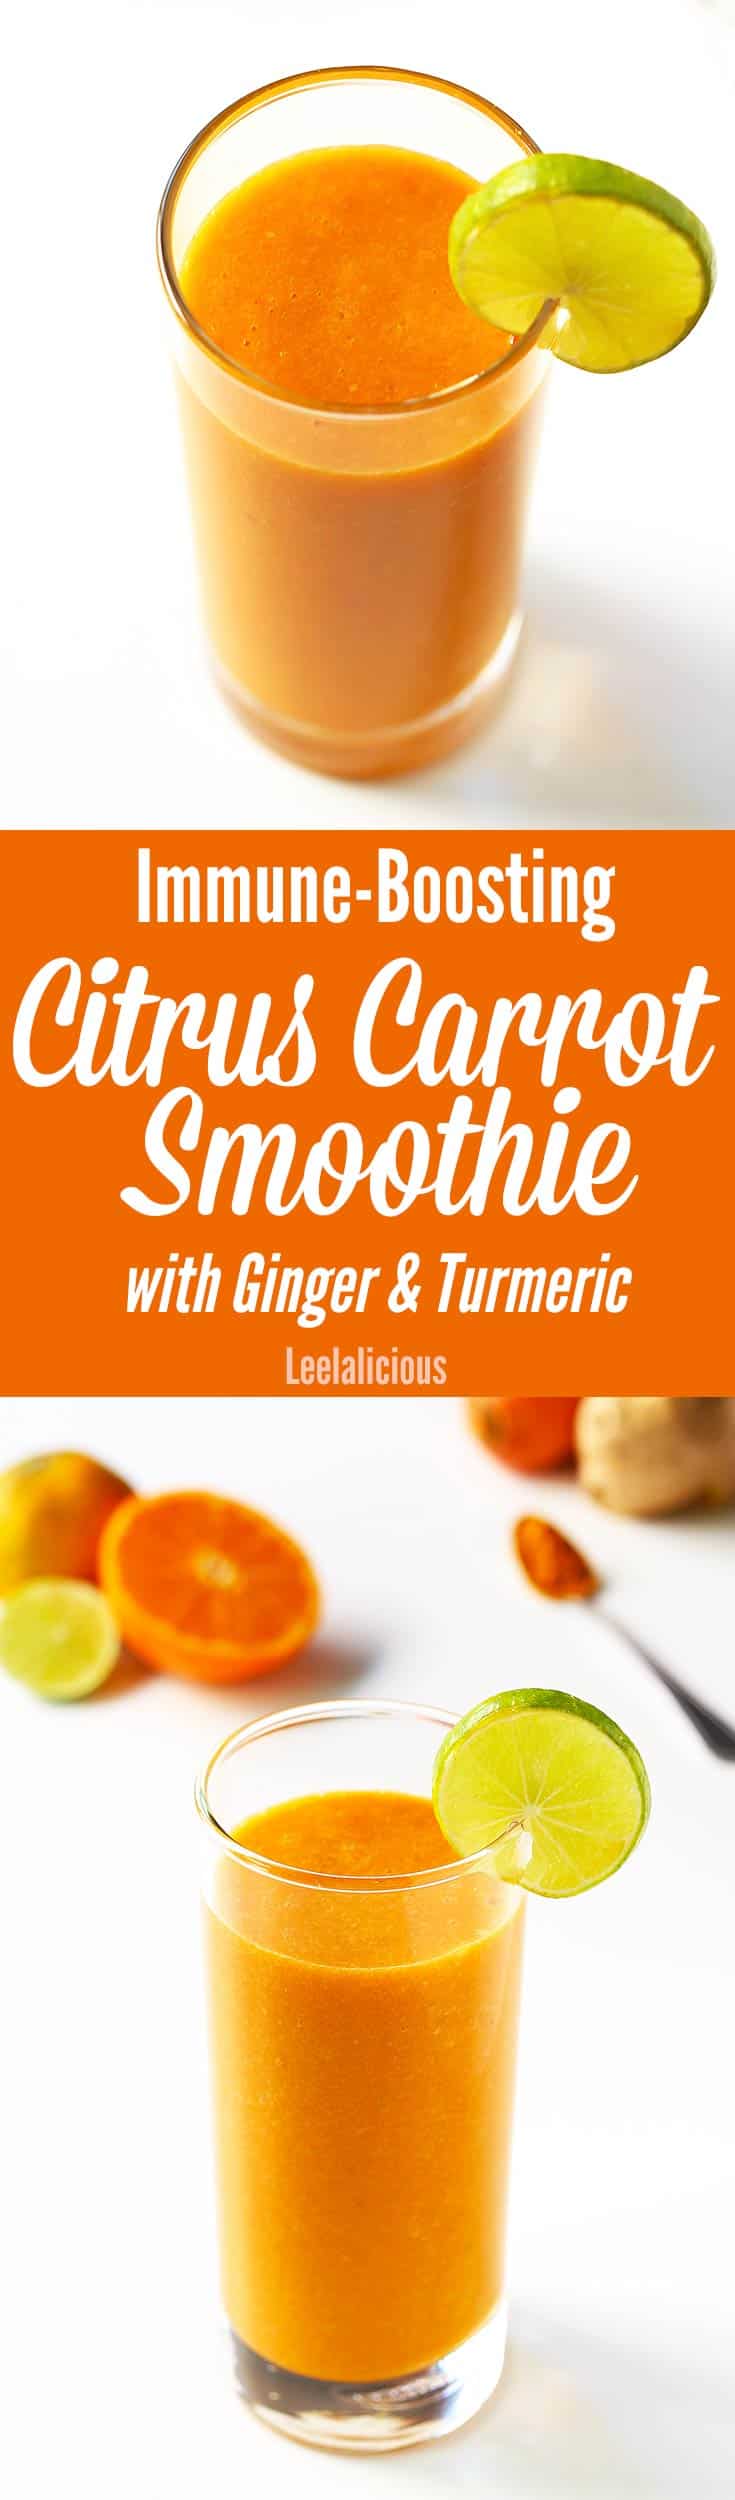 This immune boosting smoothie is made with delicious citrus fruit and carrots. This healthy smoothie recipe is high in antioxidants, vitamin C and A with ginger and turmeric for additional health benefits.